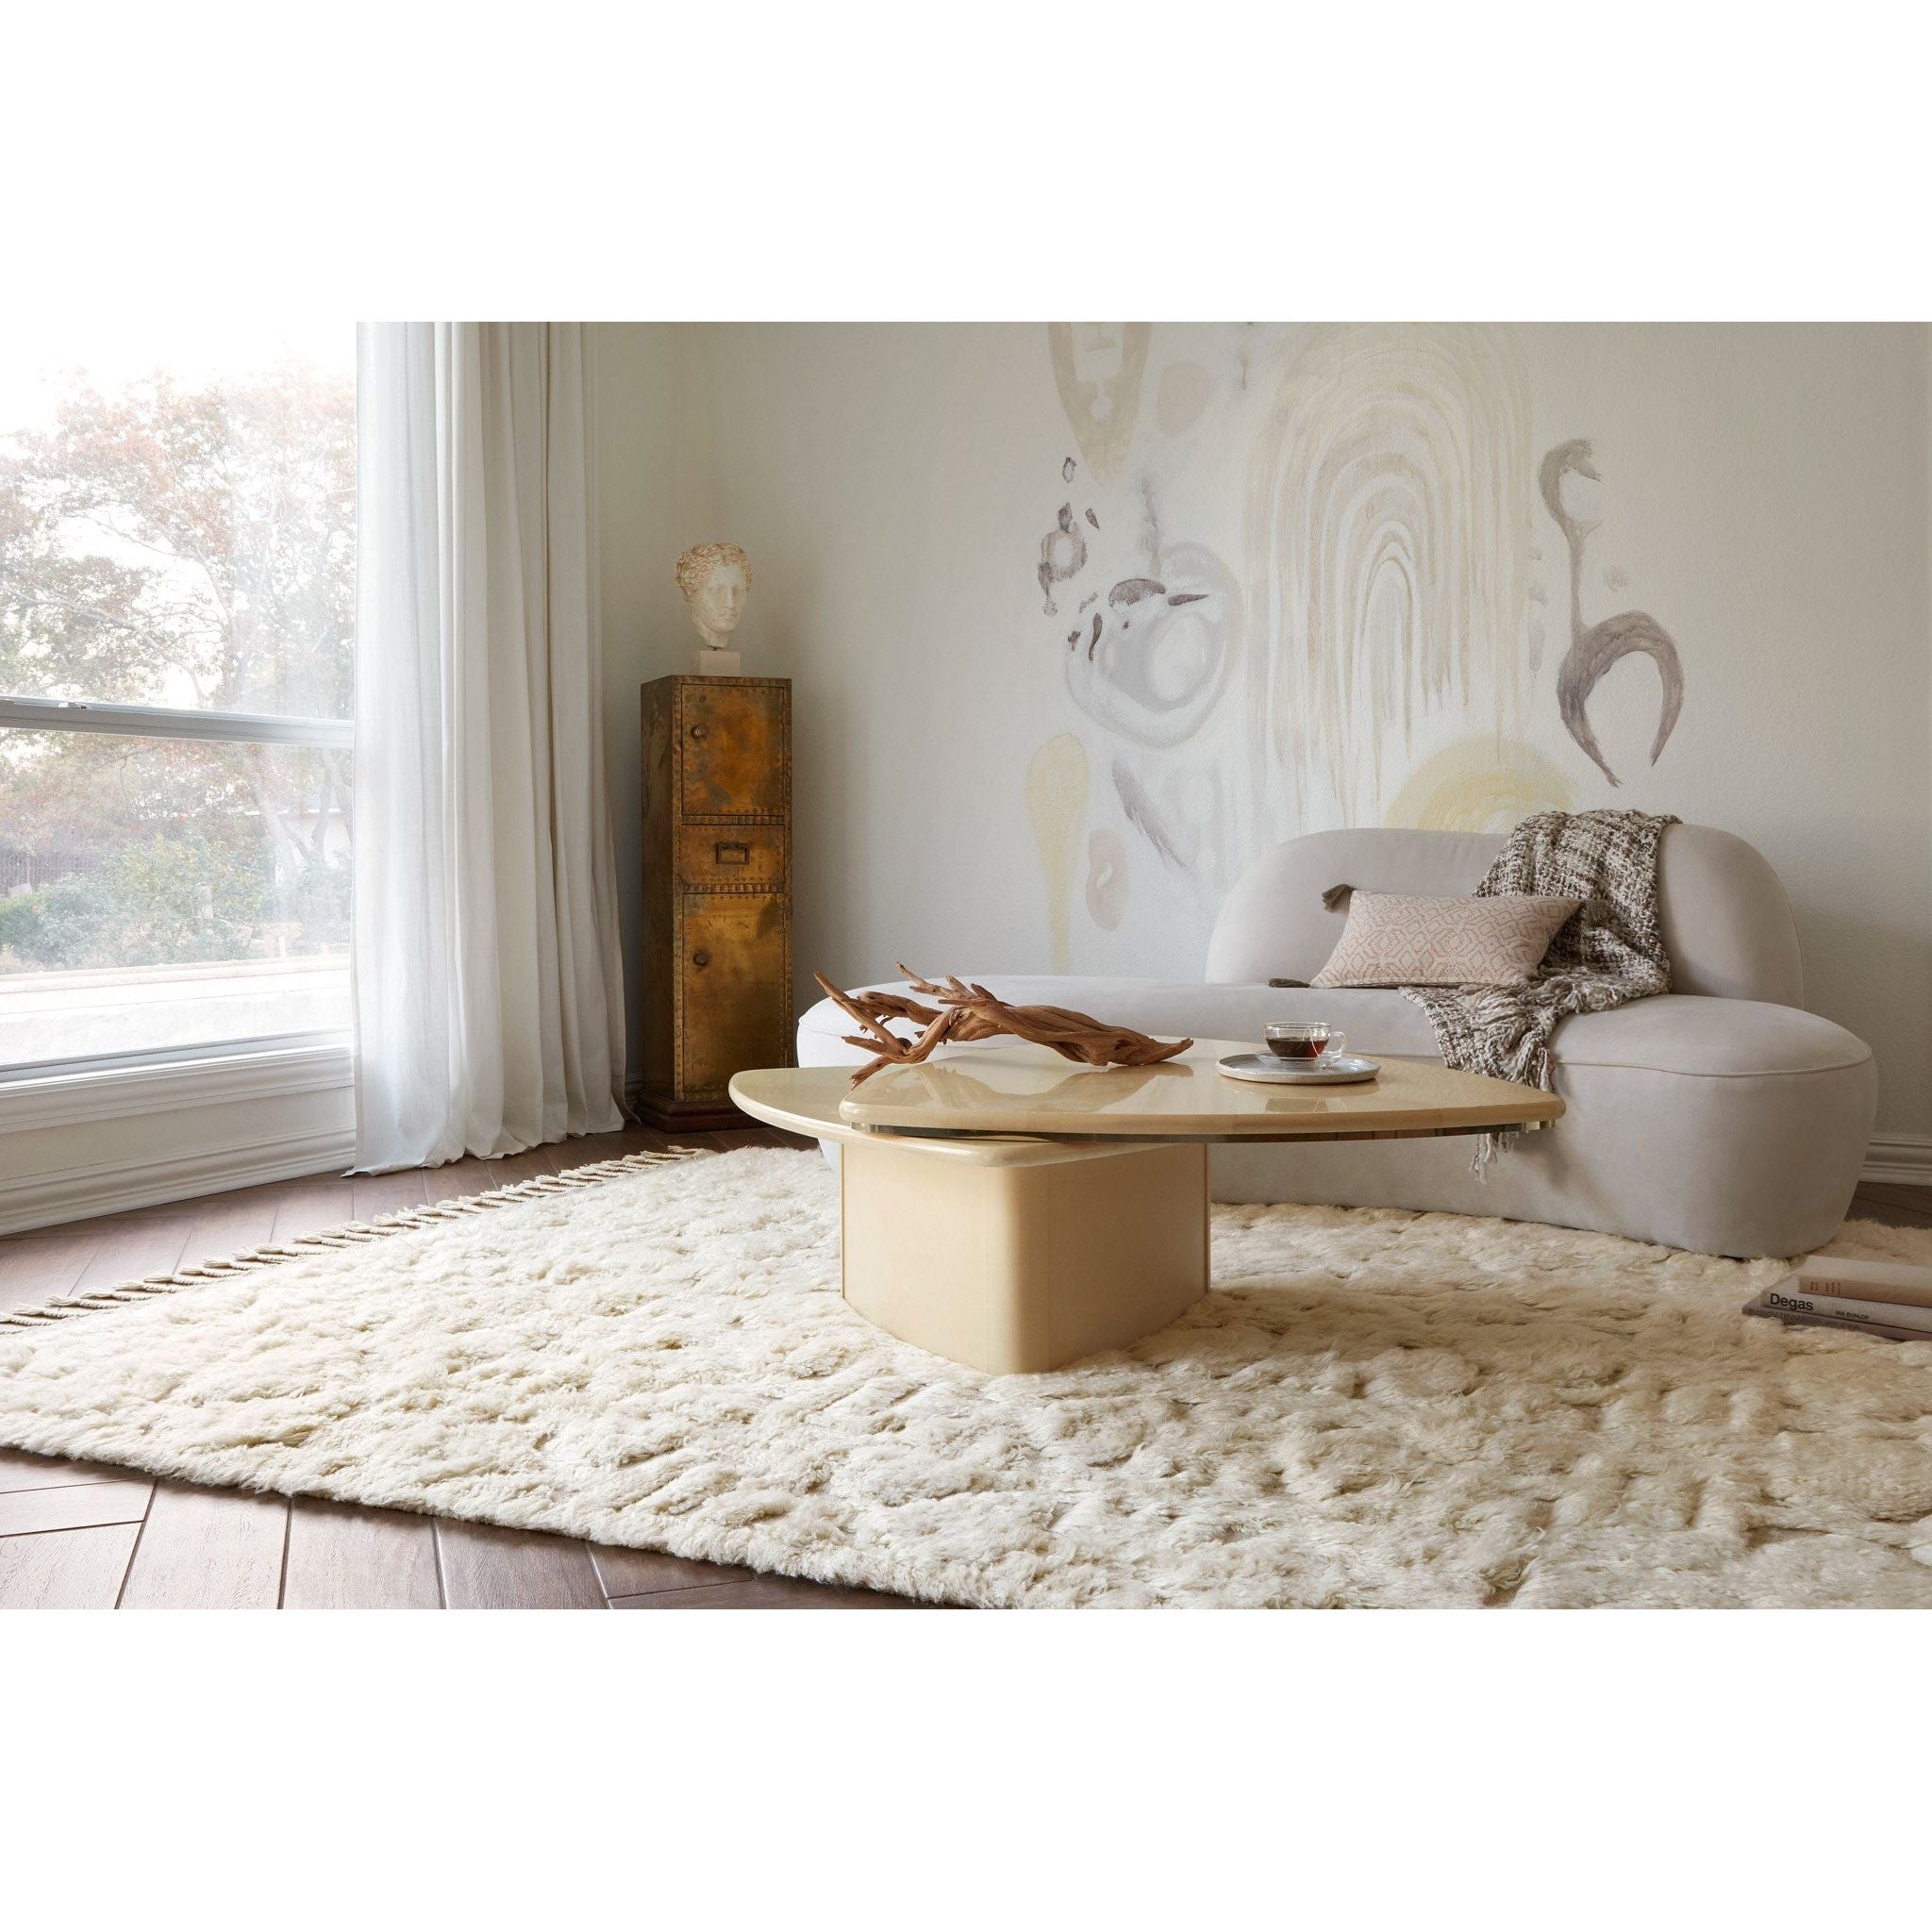 Hygge Oatmeal/Ivory Rug - Amethyst Home Inspired by Scandinavian textile motifs, the Hygge Collection combines a soft shaggy texture with an enduring neutral palette. Each piece is hand-loomed in India of 100% wool, ensuring long-wearing durability in even the busiest of rooms. 